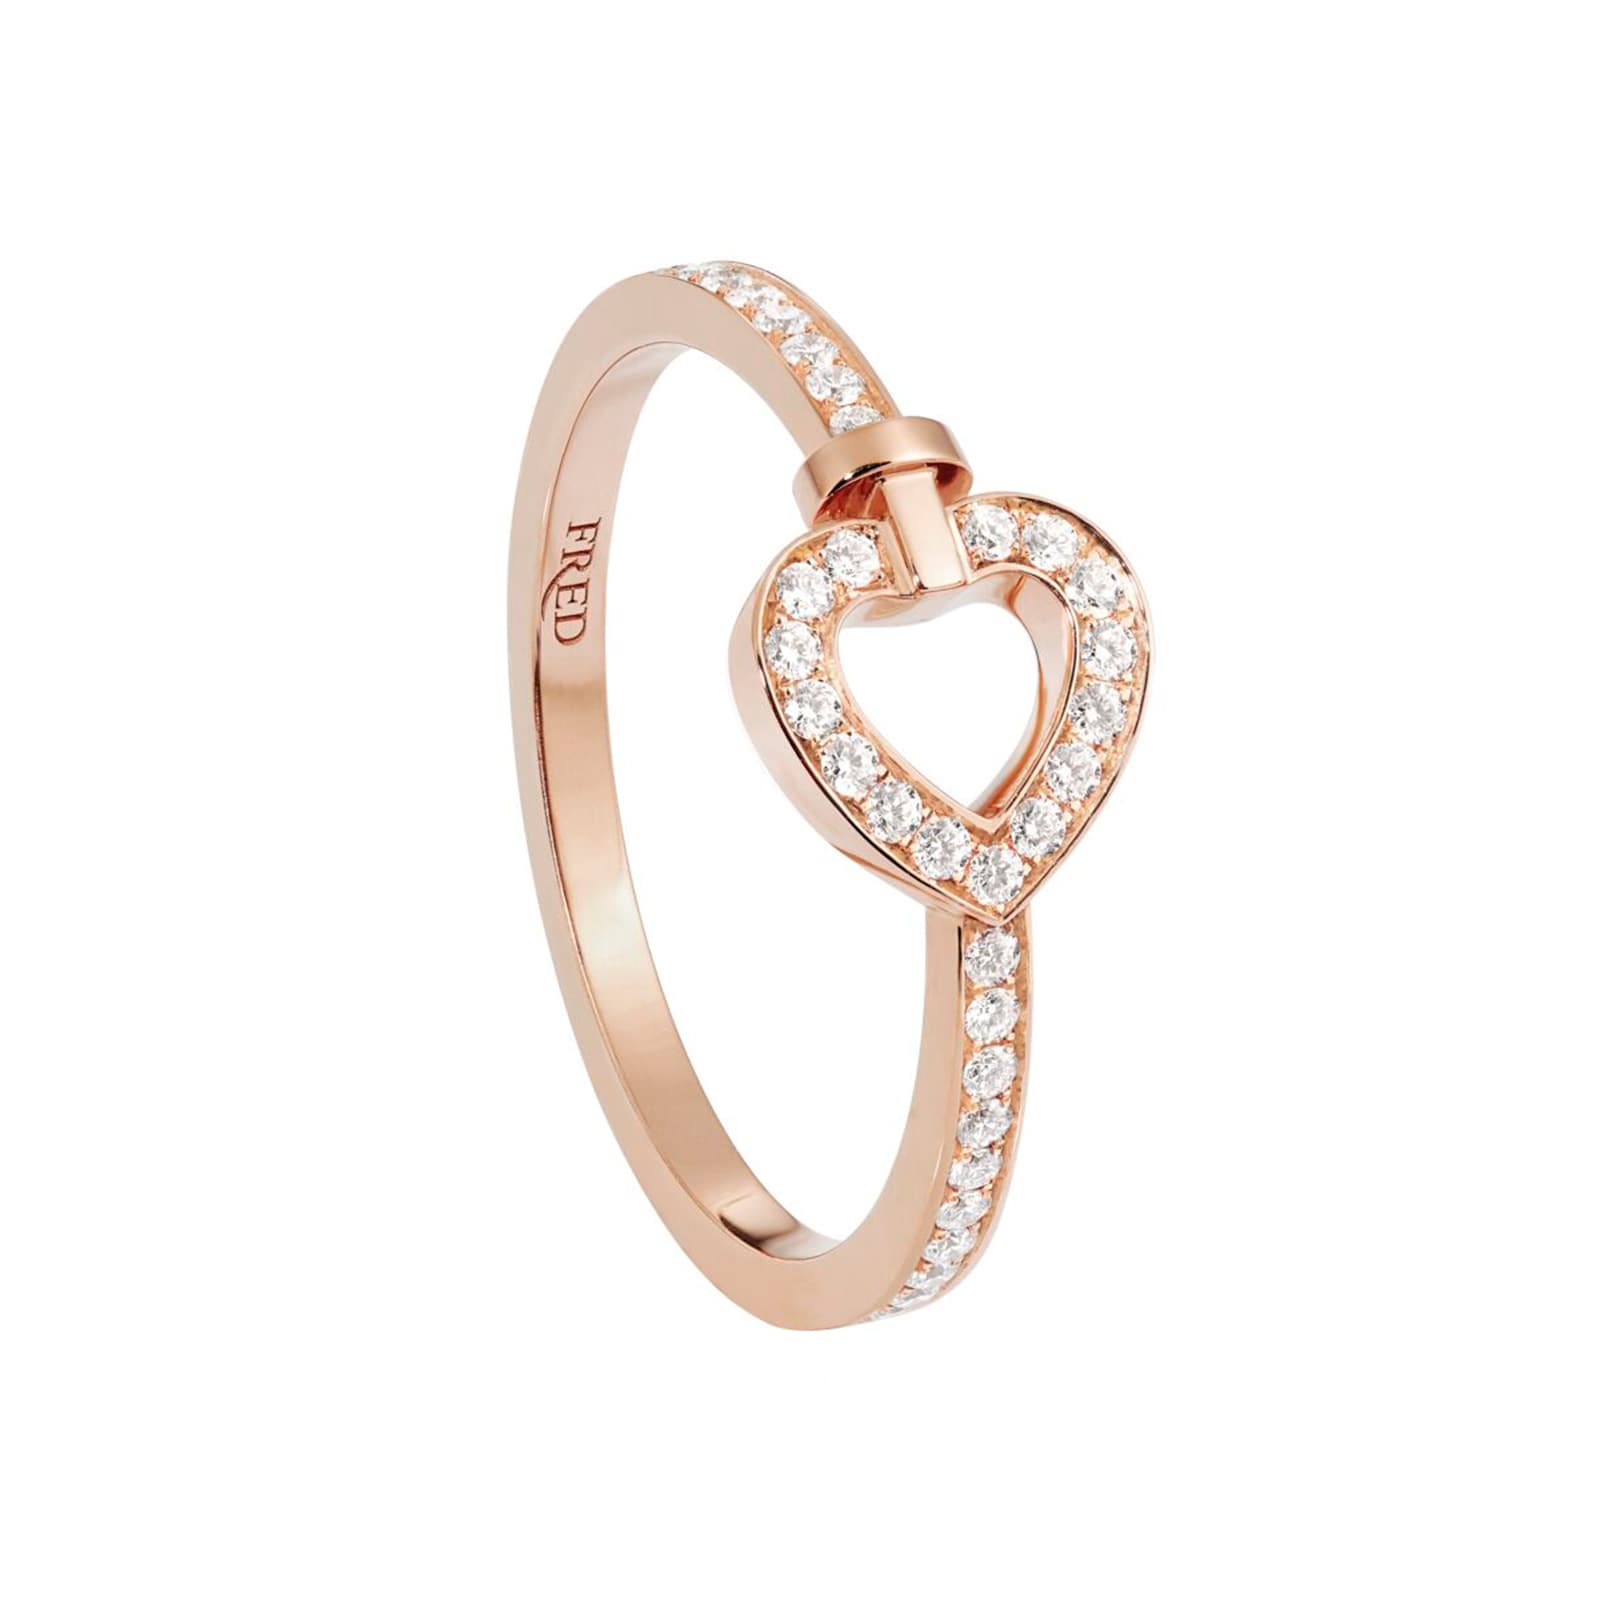 Pretty Woman 18ct Rose Gold 0.21ct Diamond Ring - Ring Size M